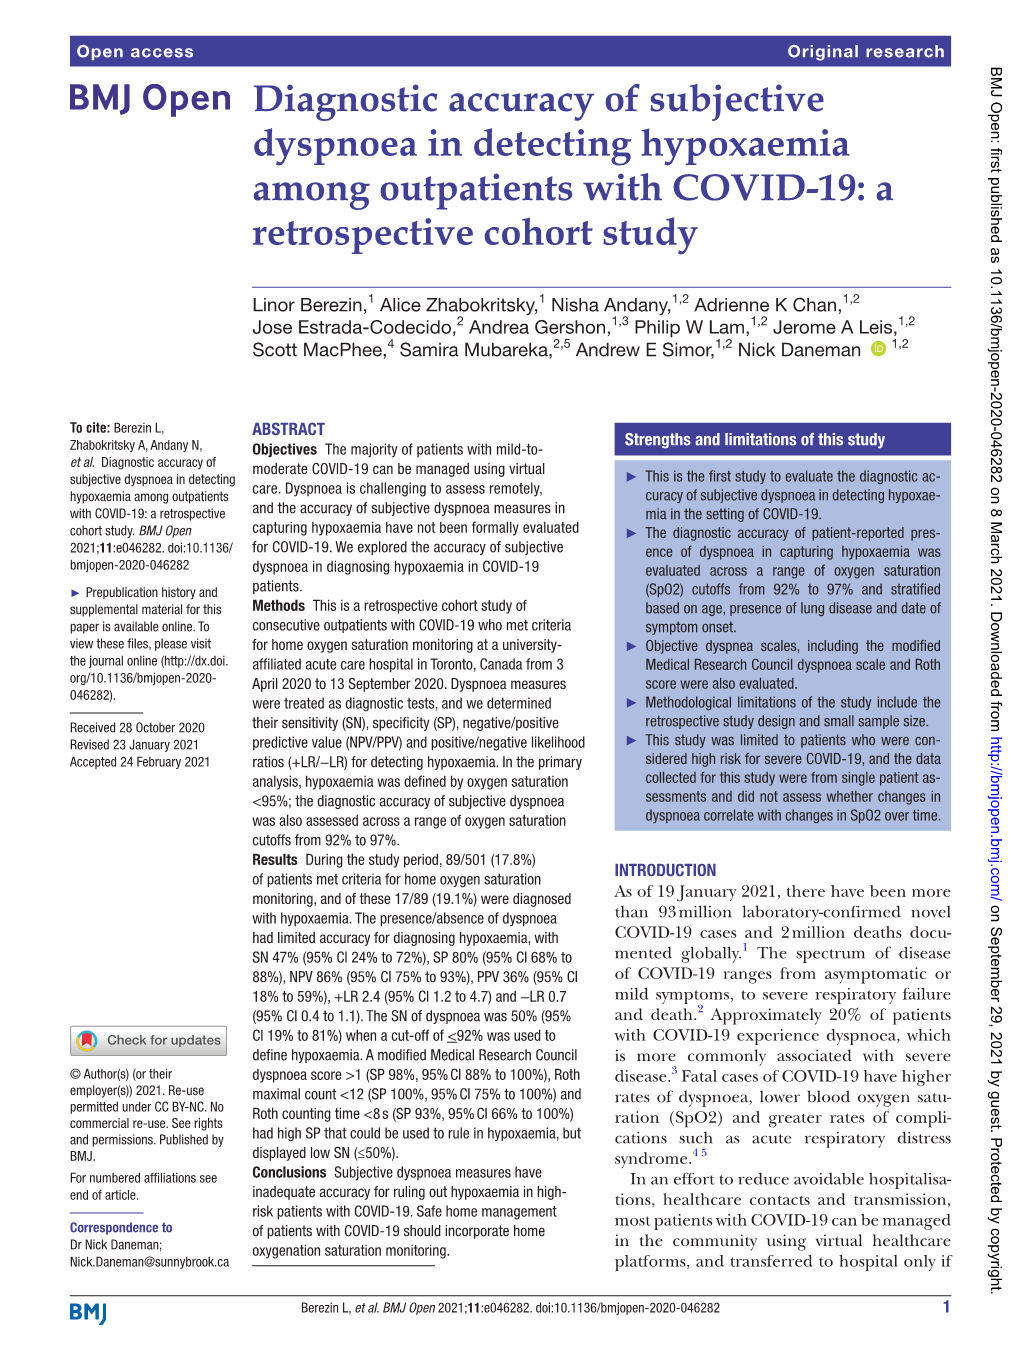 Diagnostic Accuracy of Subjective Dyspnoea in Detecting Hypoxaemia Among Outpatients with COVID-19: a Retrospective Cohort Study